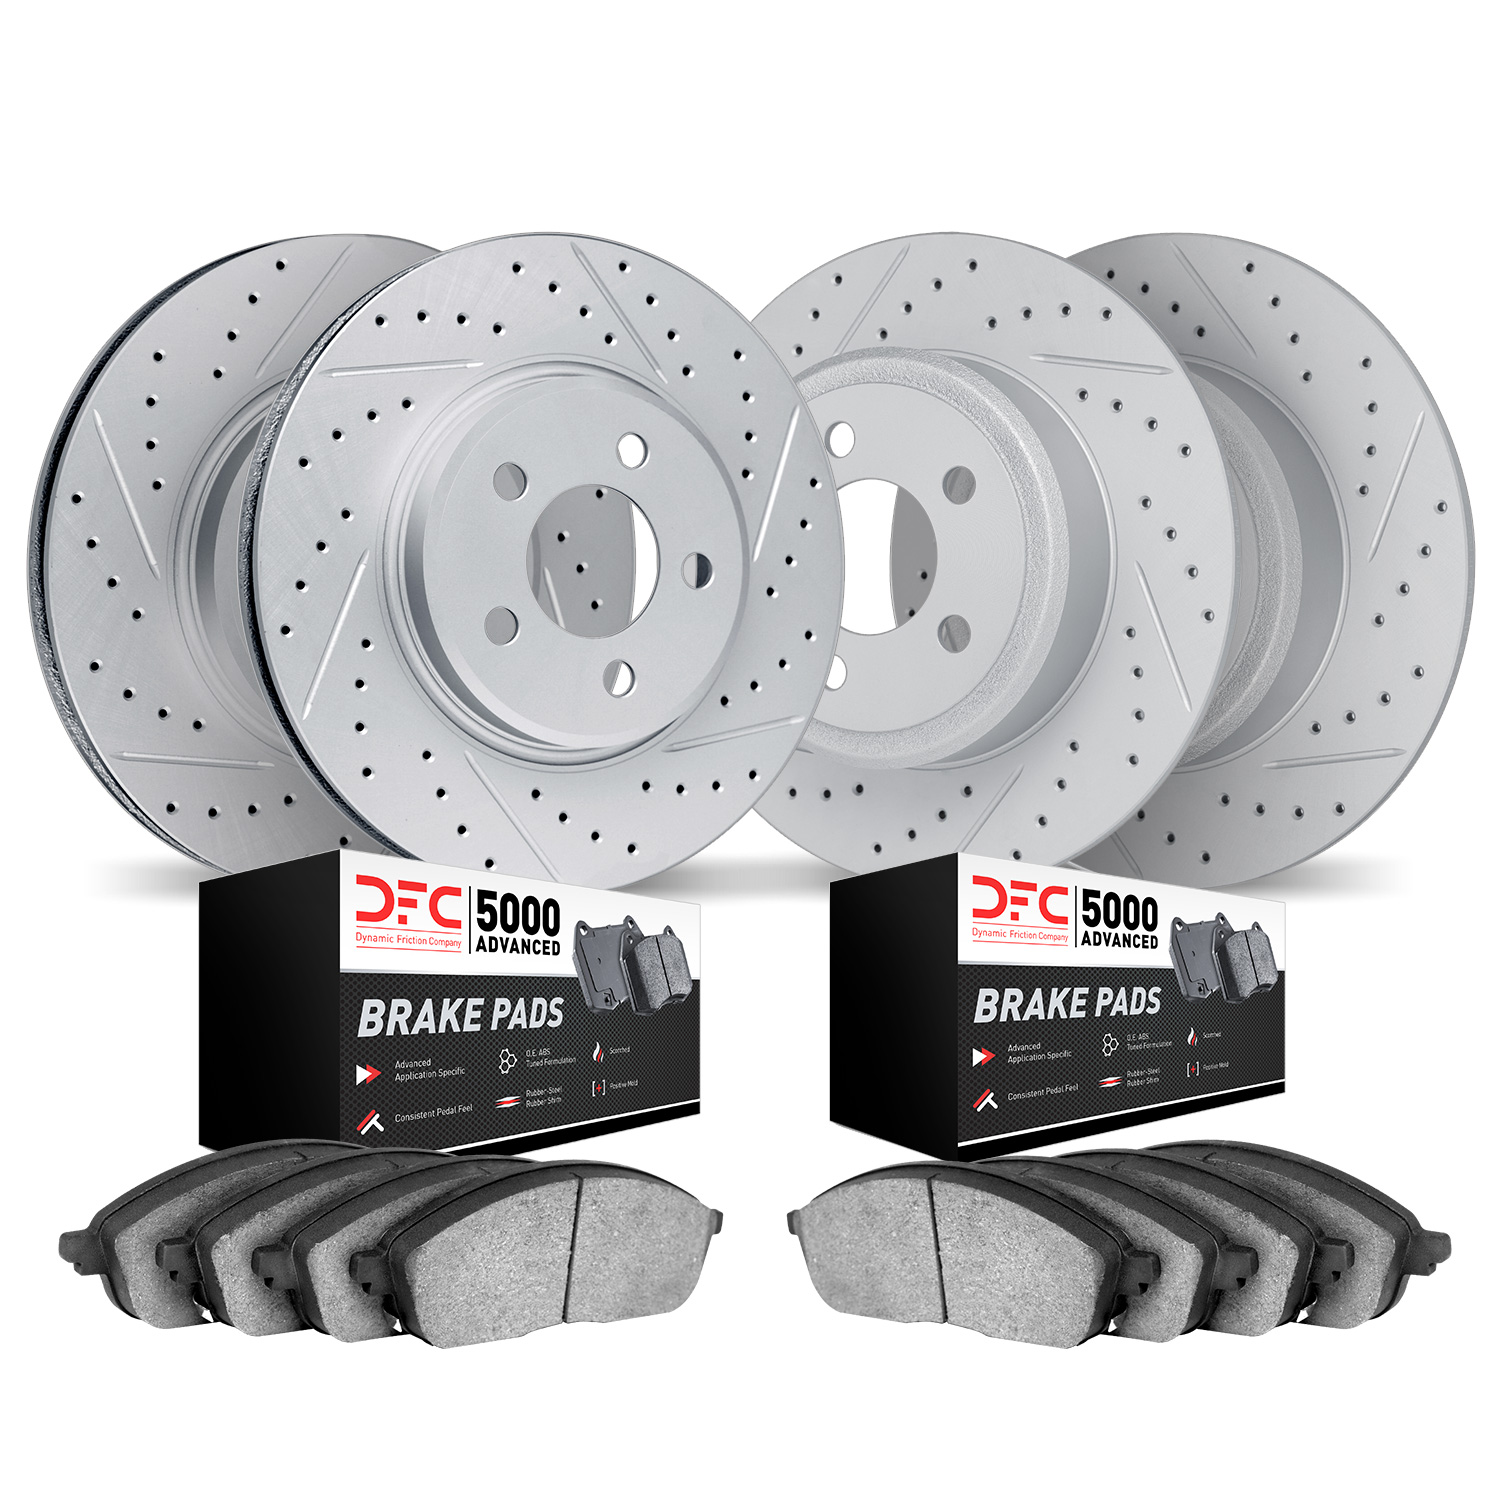 2504-76098 Geoperformance Drilled/Slotted Rotors w/5000 Advanced Brake Pads Kit, 2003-2008 Multiple Makes/Models, Position: Fron